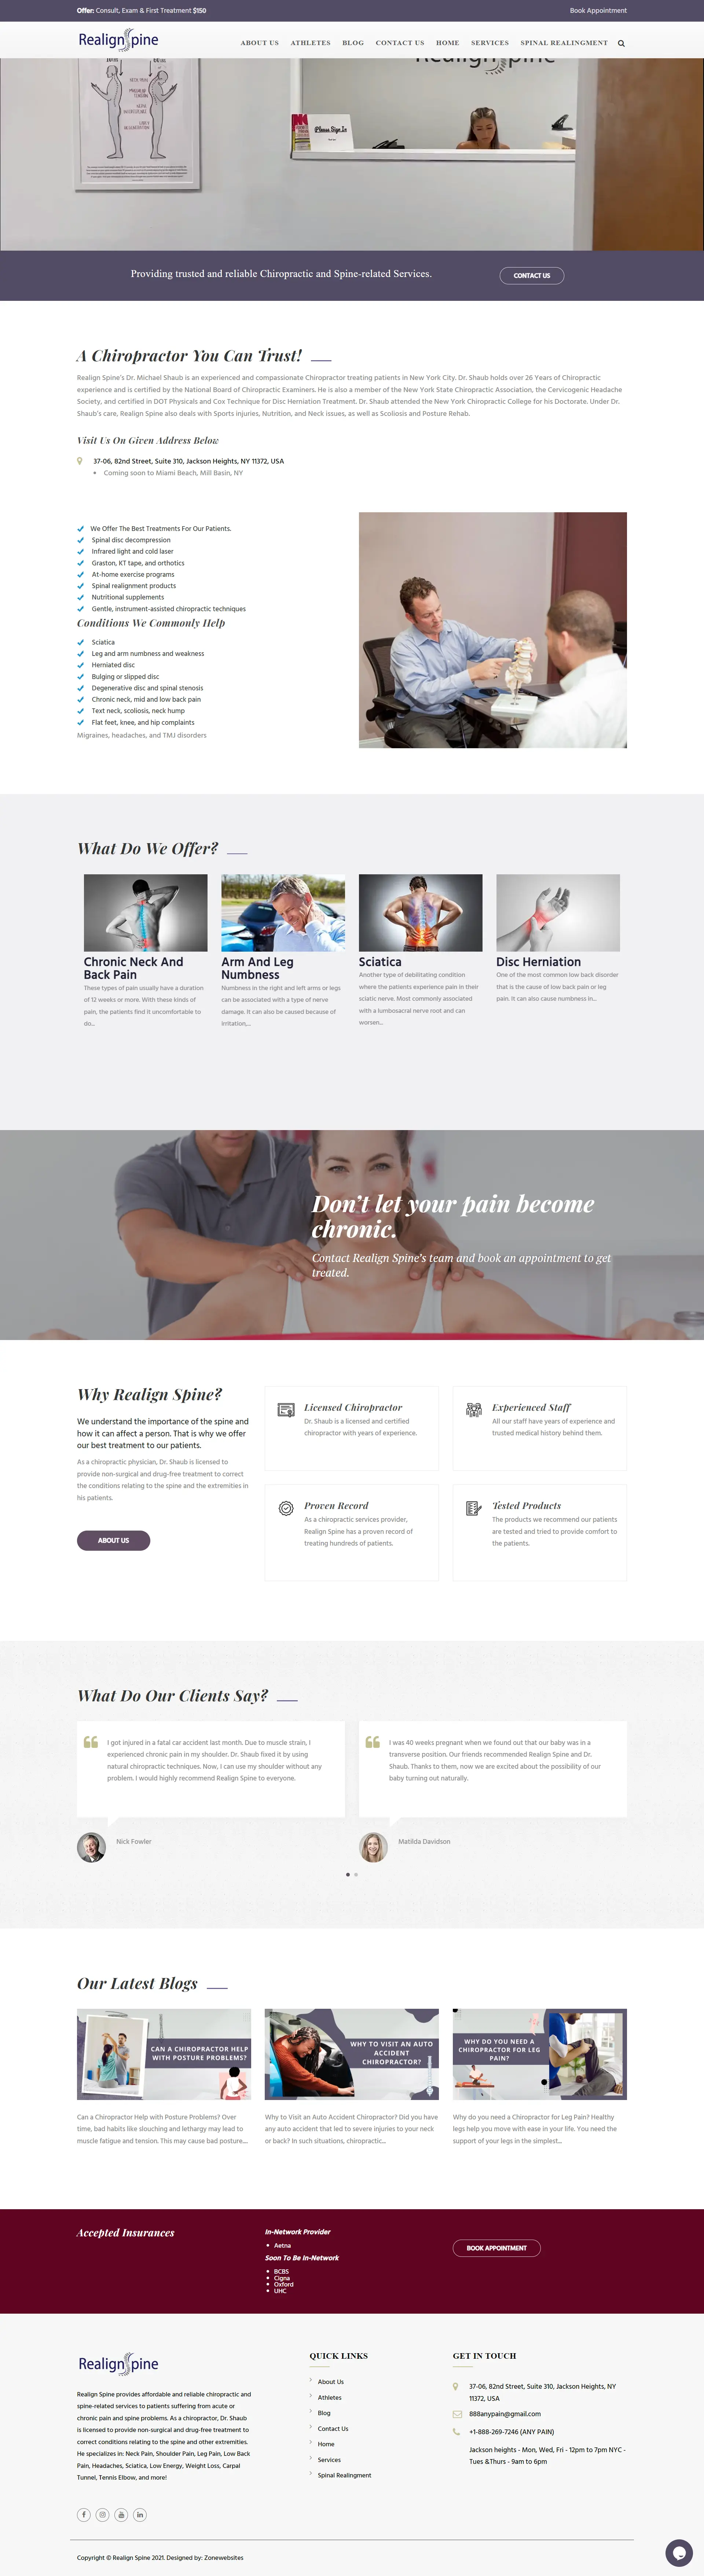 Spine & Chiropractic Care and Service Website Layout